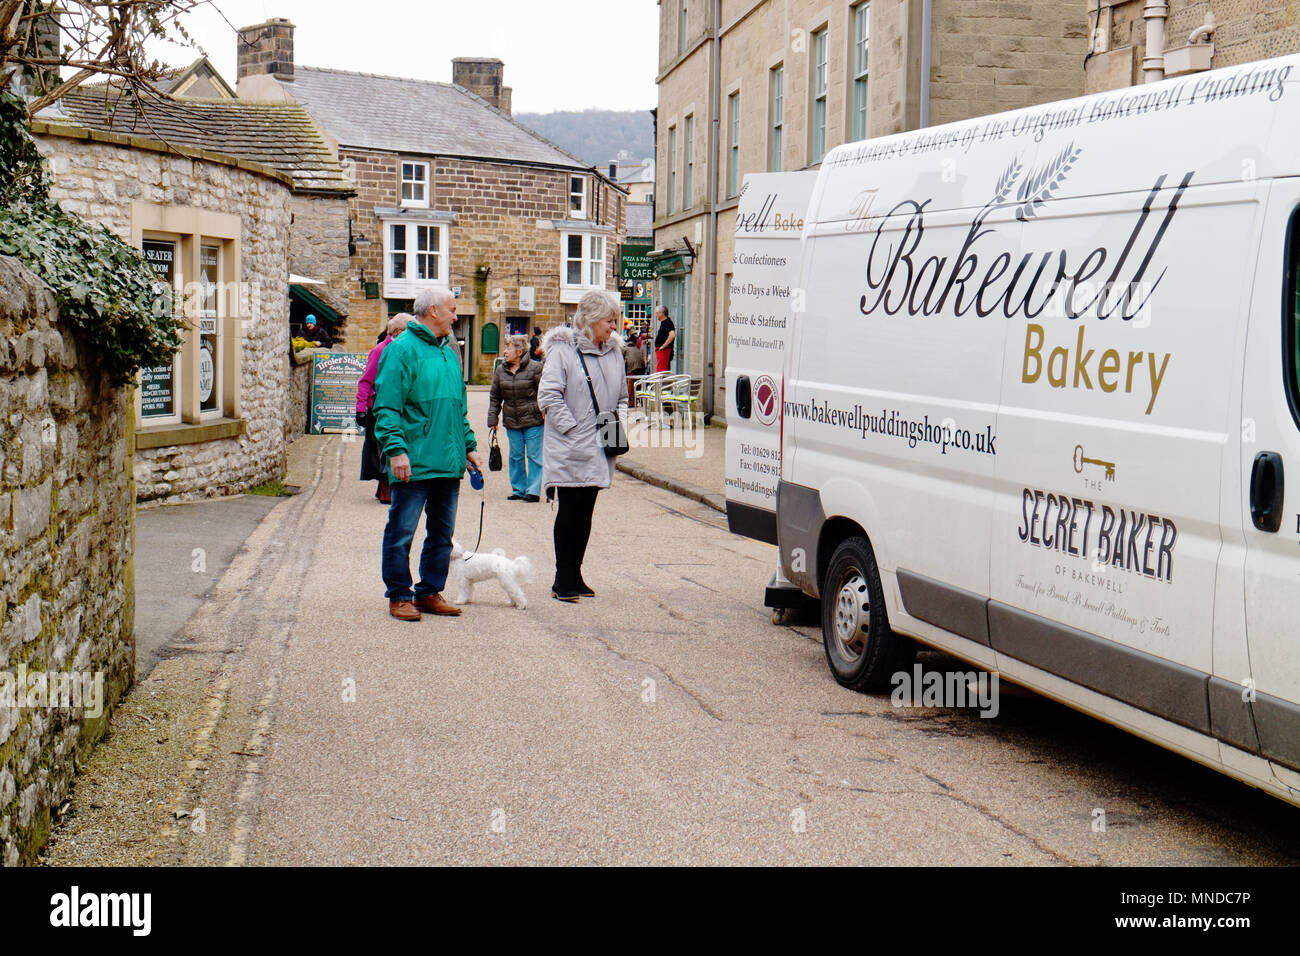 A baker's van delivering Bakewell Tarts in Bakewell, Derbyshire, England Stock Photo